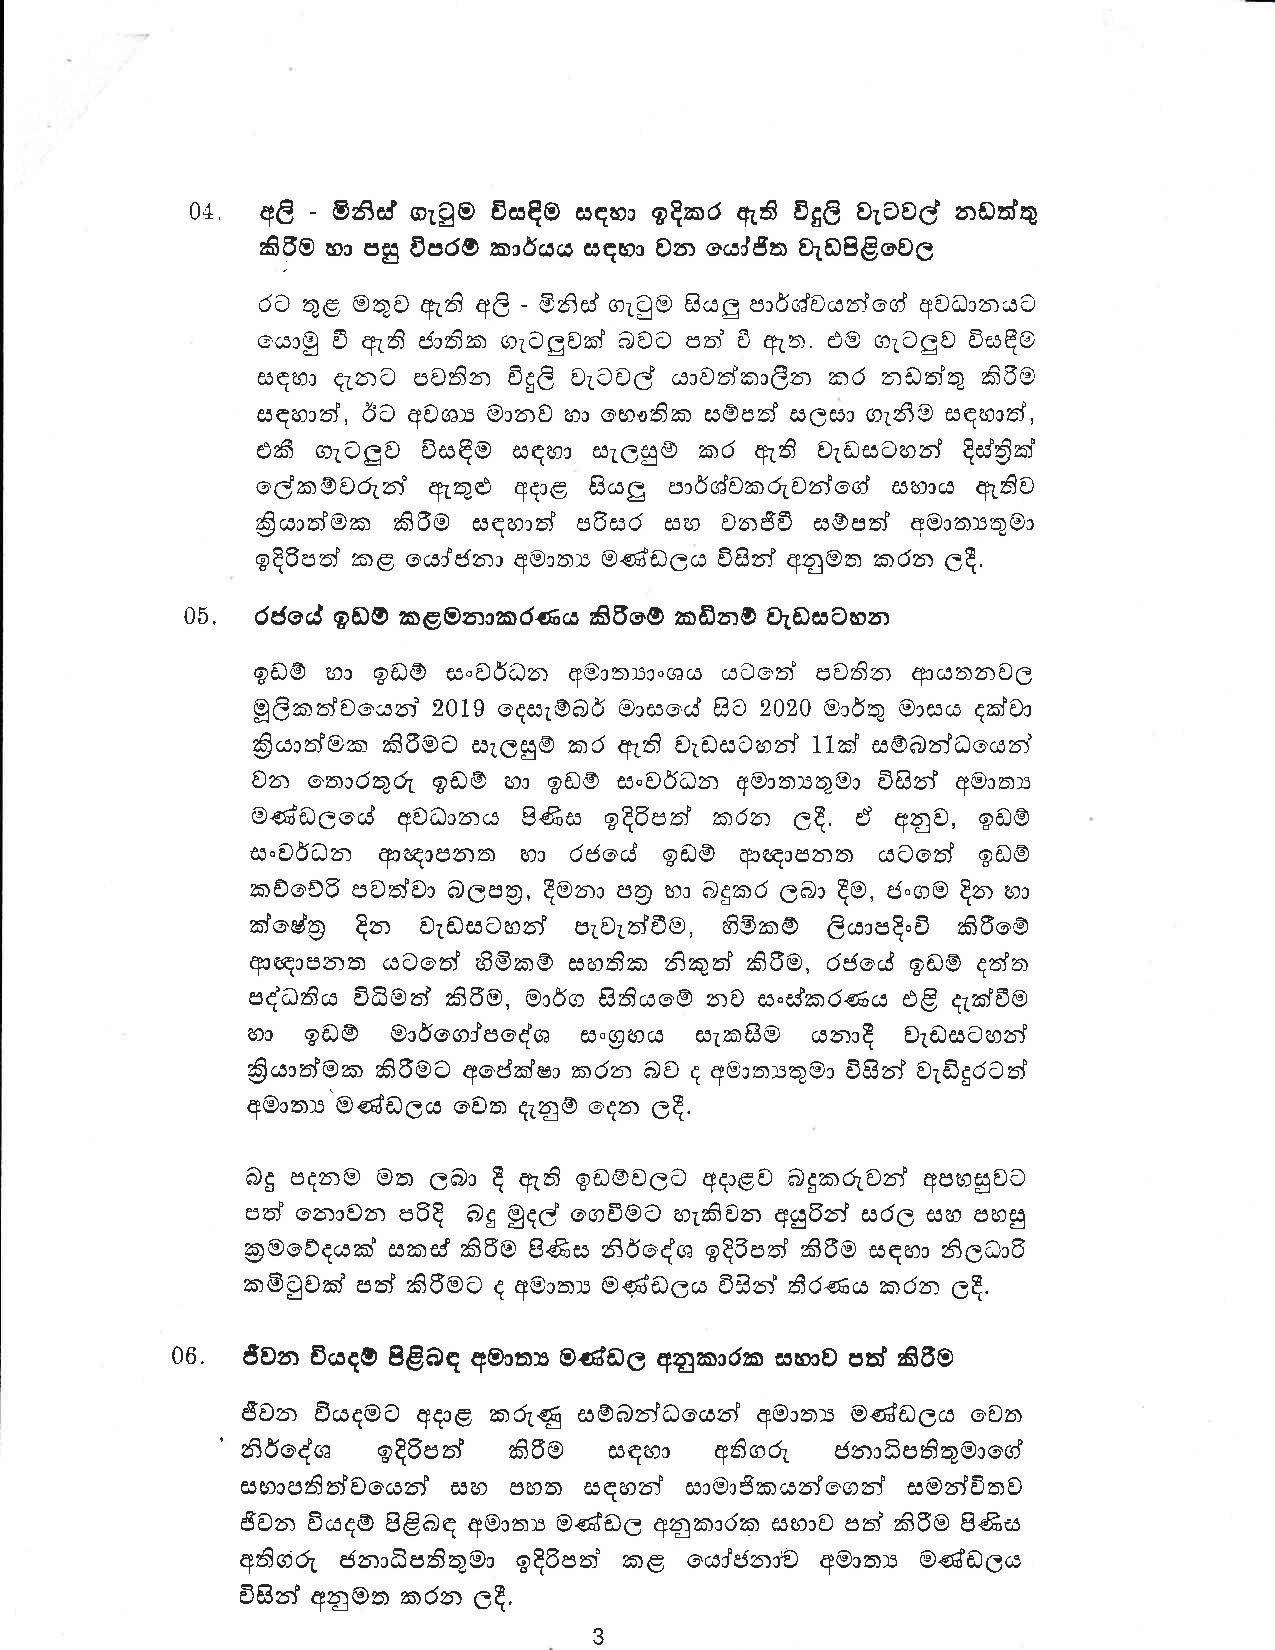 Cabinet Decision S on 10.12.2019 page 003